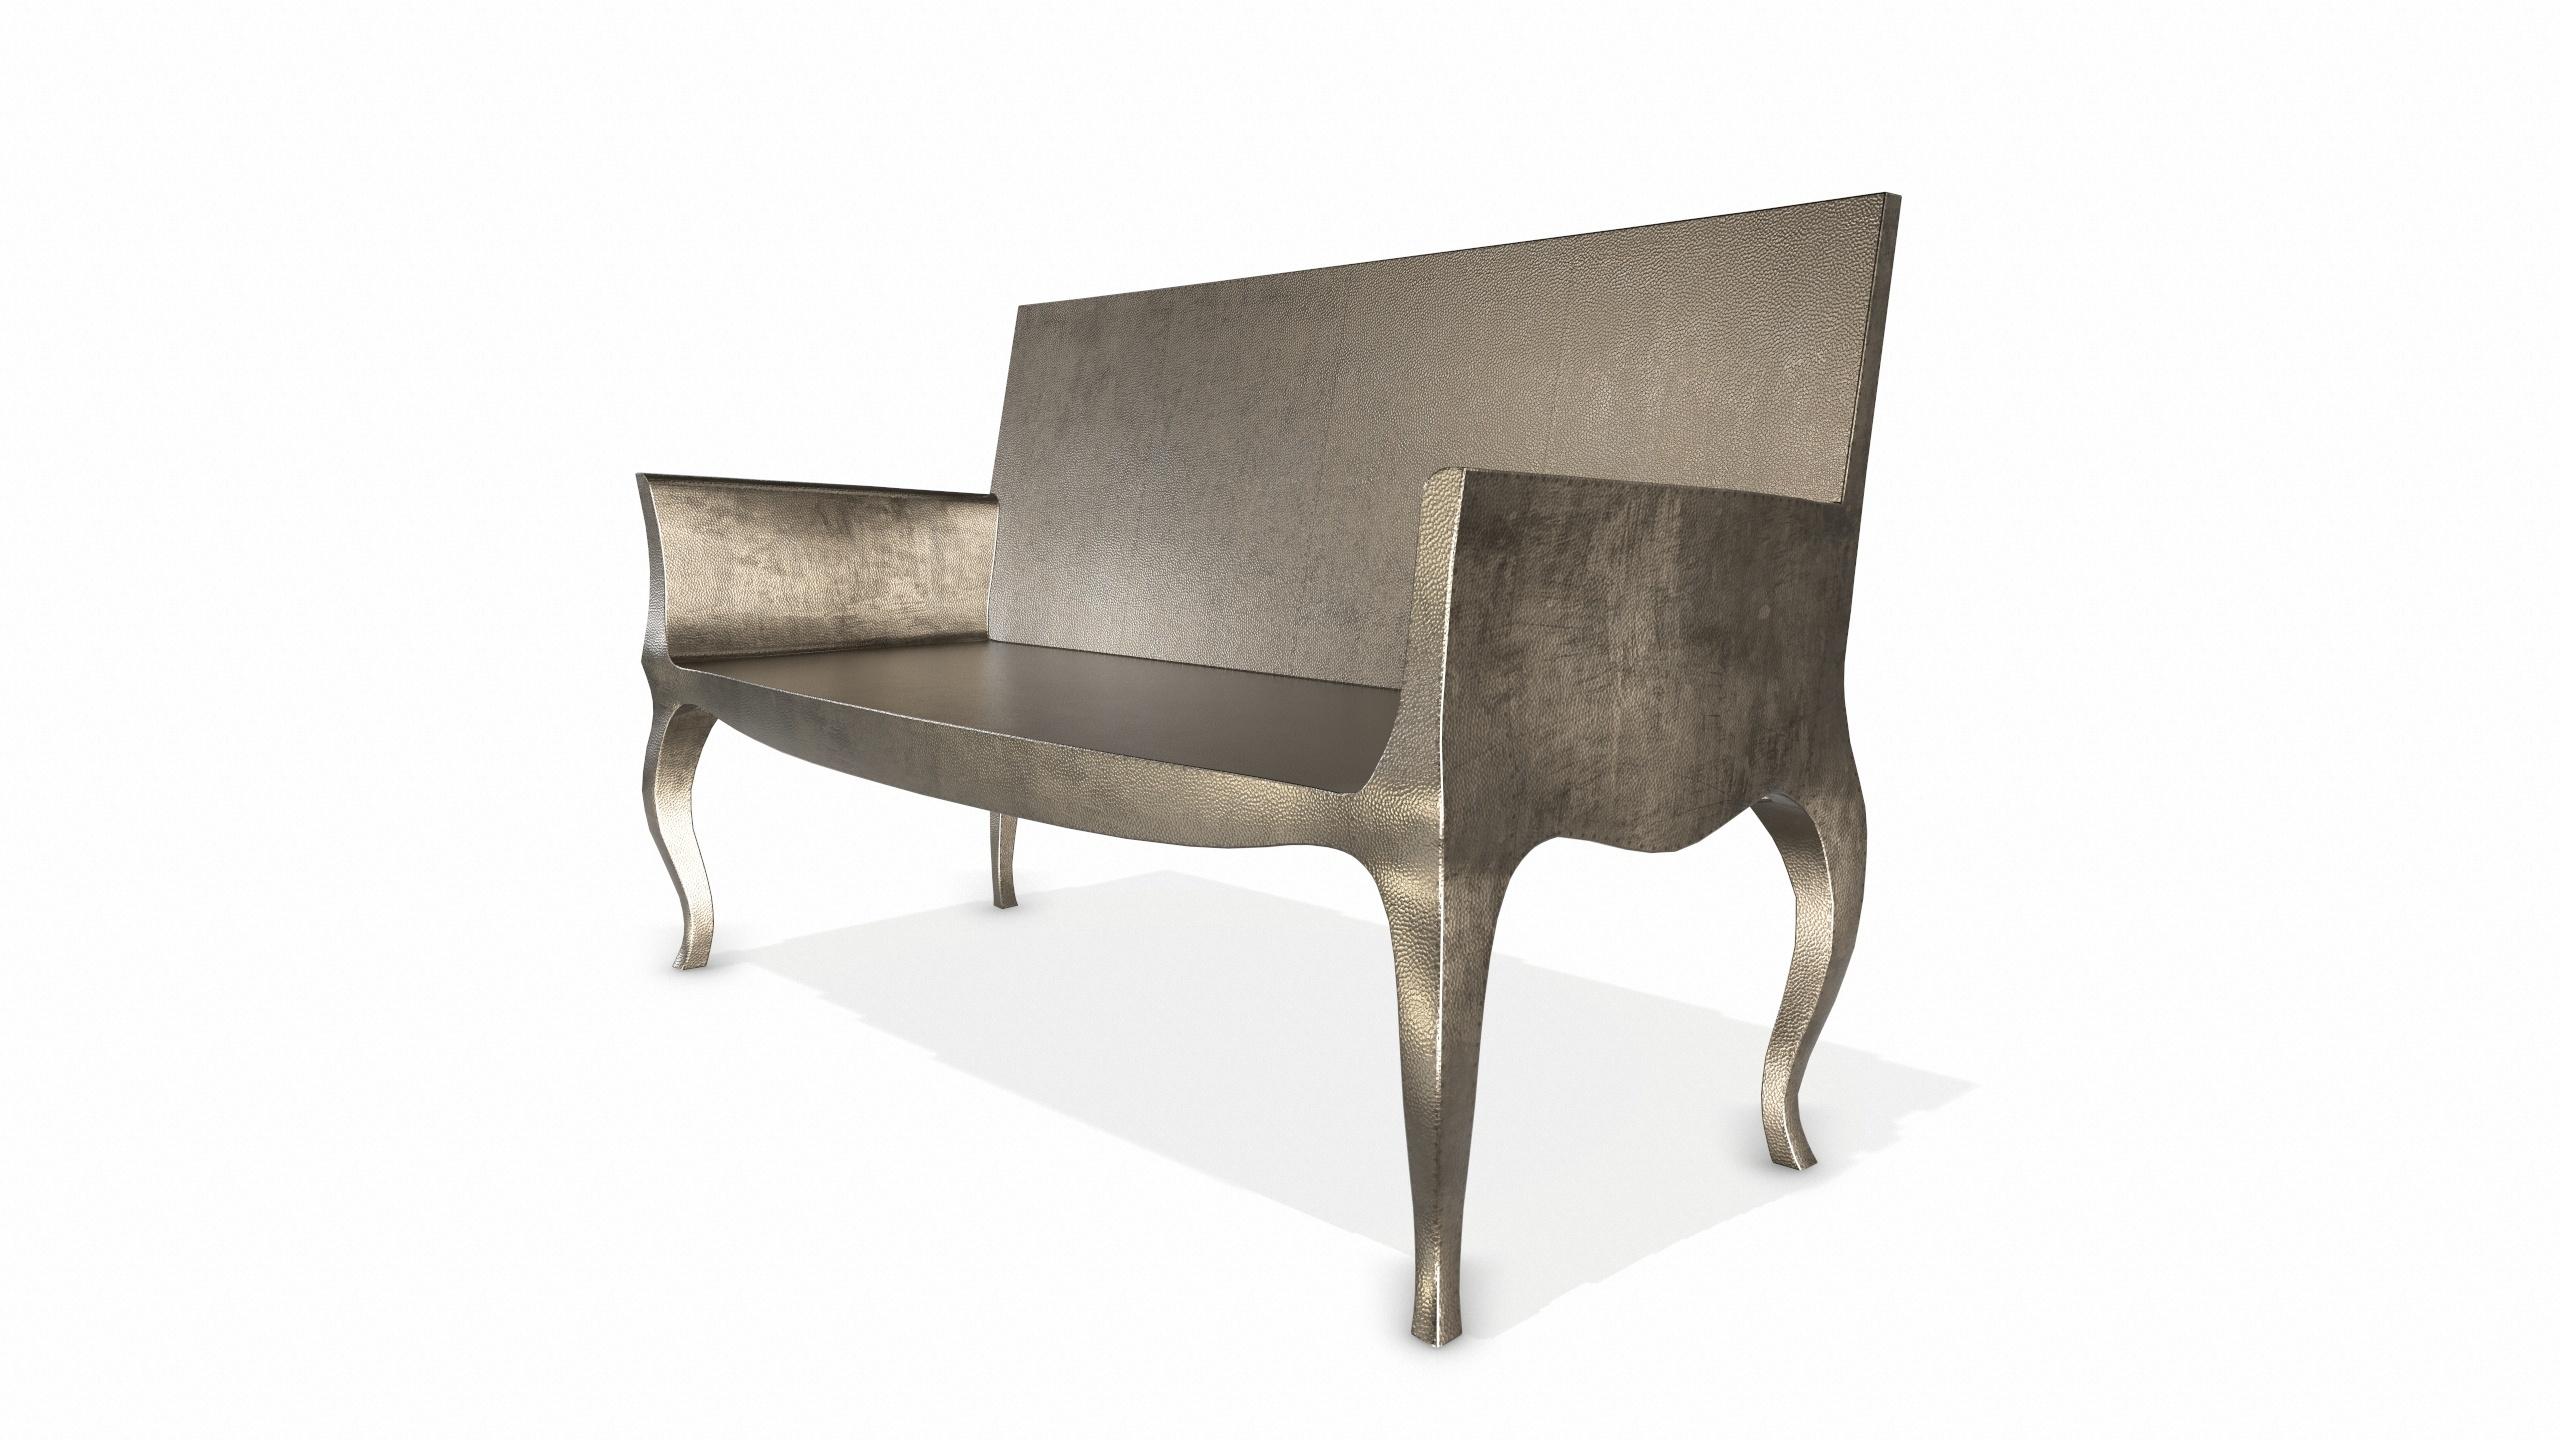 Woodwork Louise Settee Art Deco Canapes in Mid. Hammered Antique Bronze by Paul Mathieu For Sale